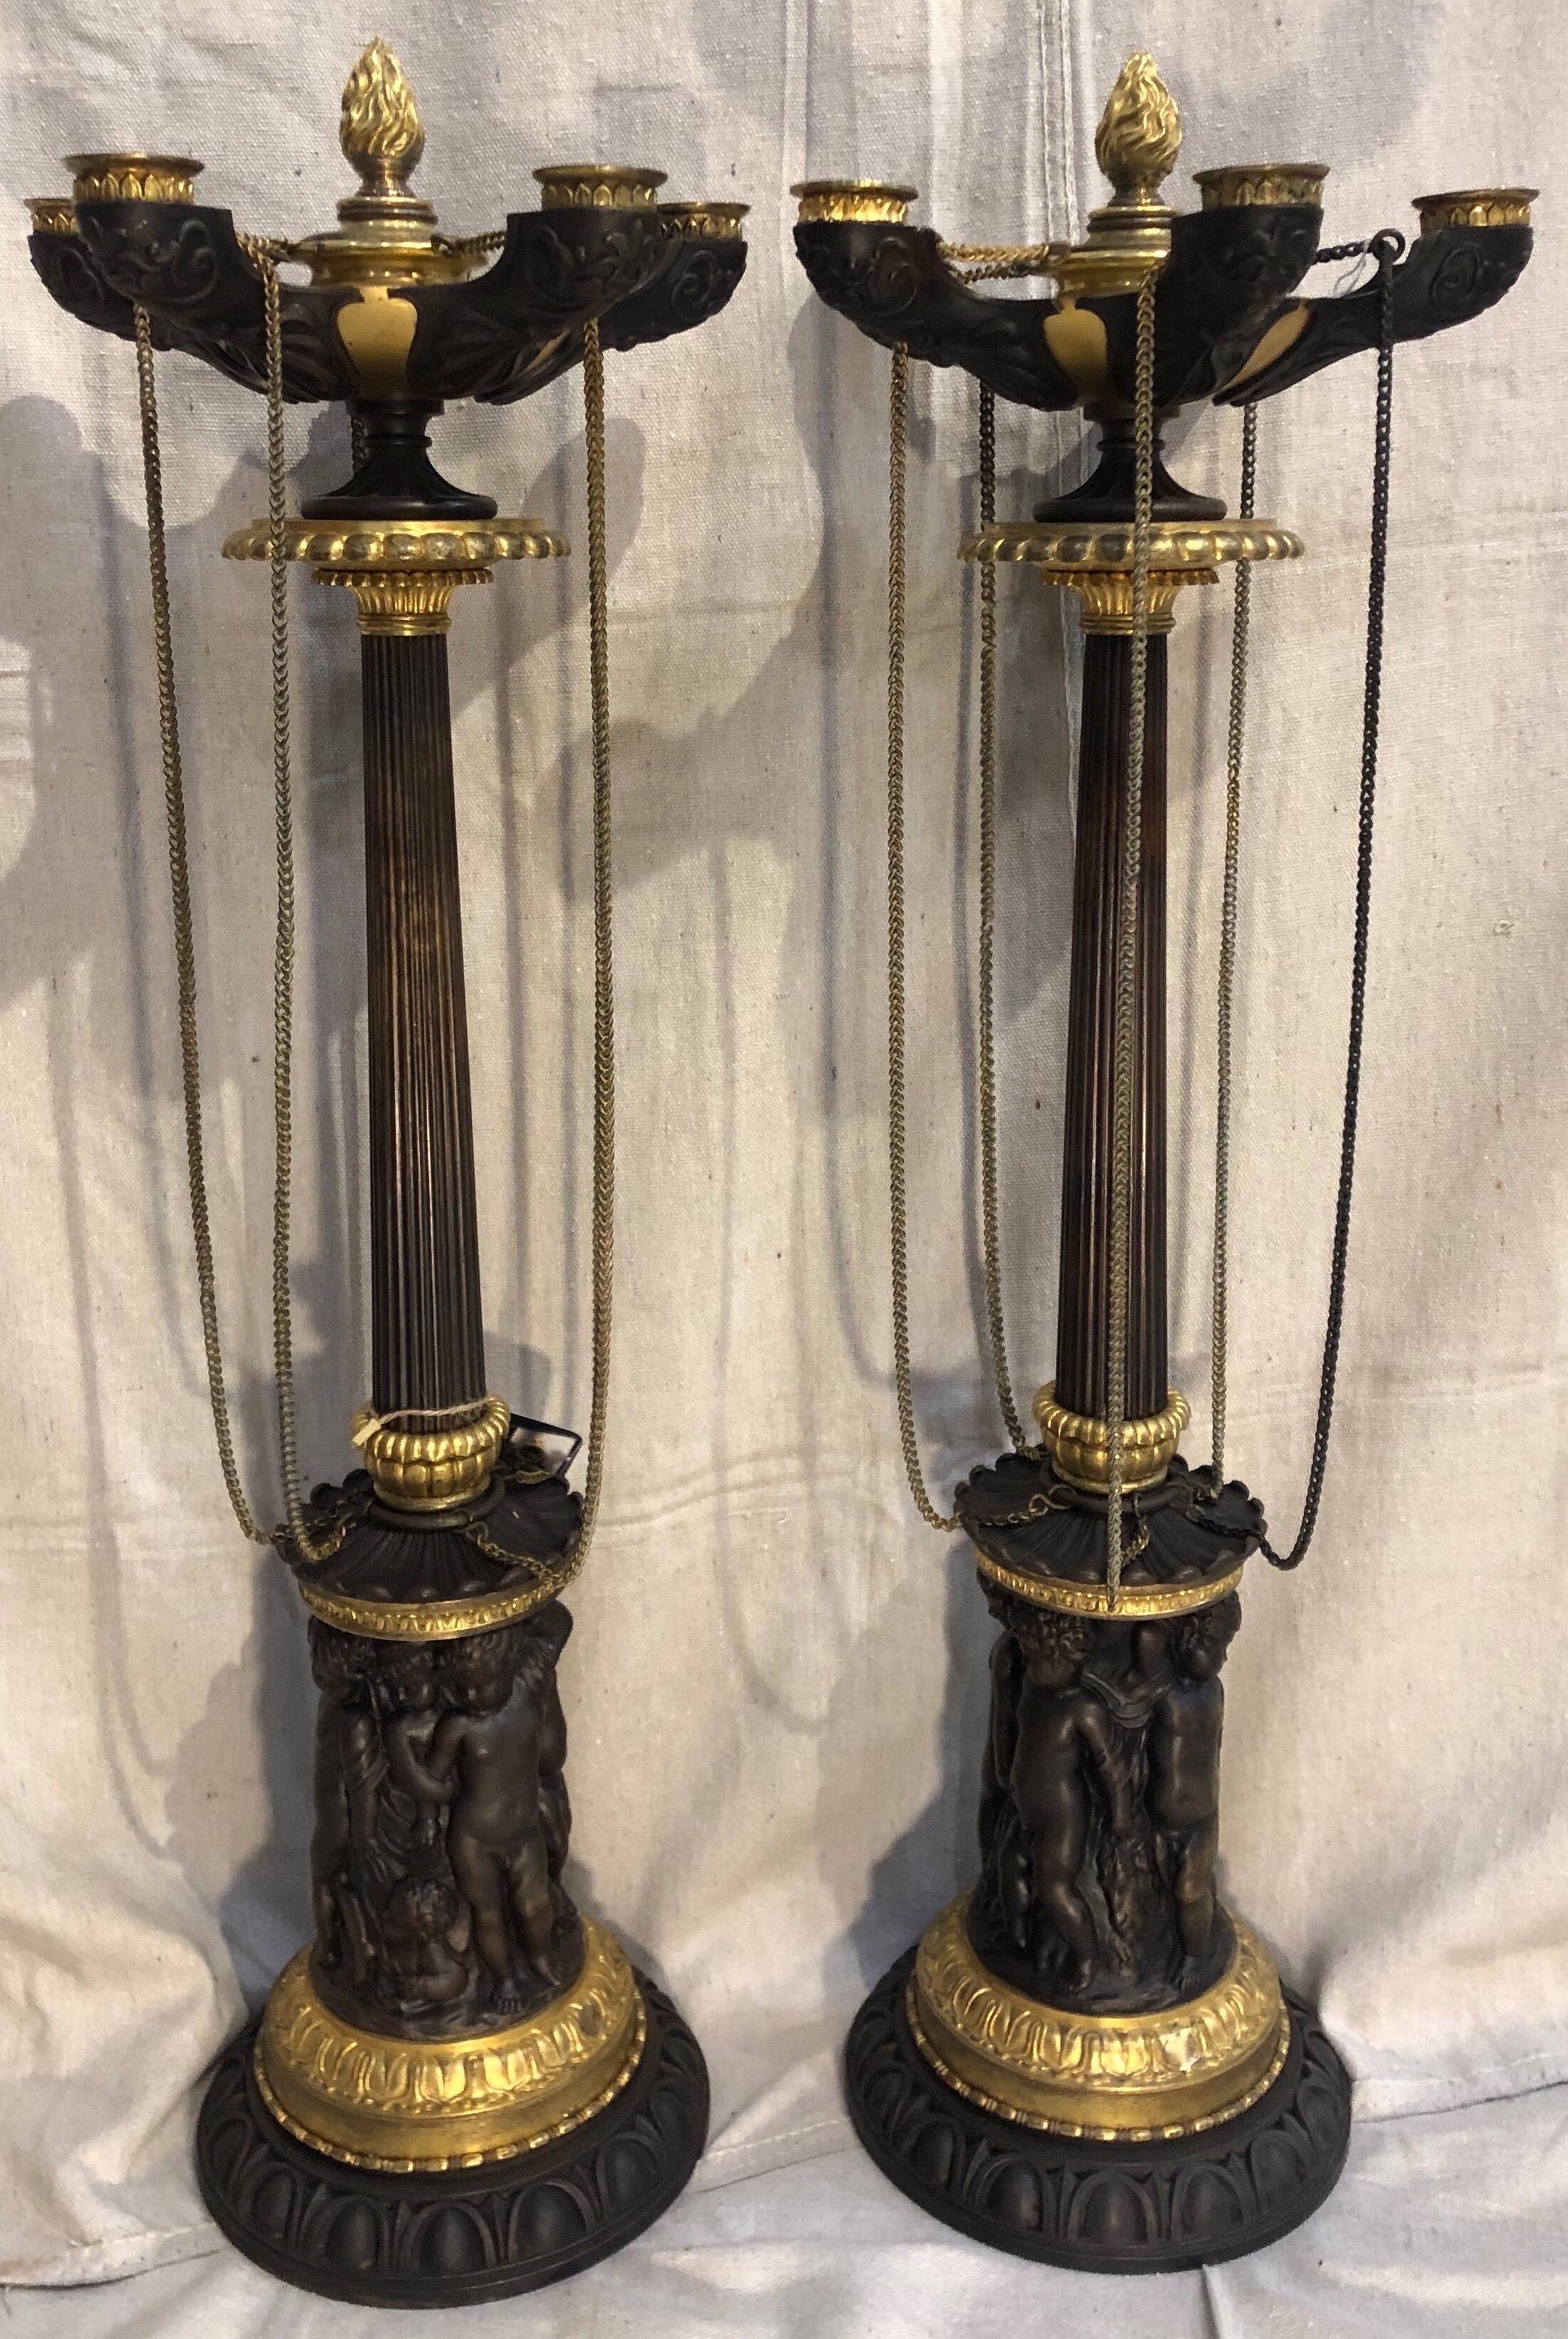 Very good pair of 19th century continental neoclassical bronze candelabras.